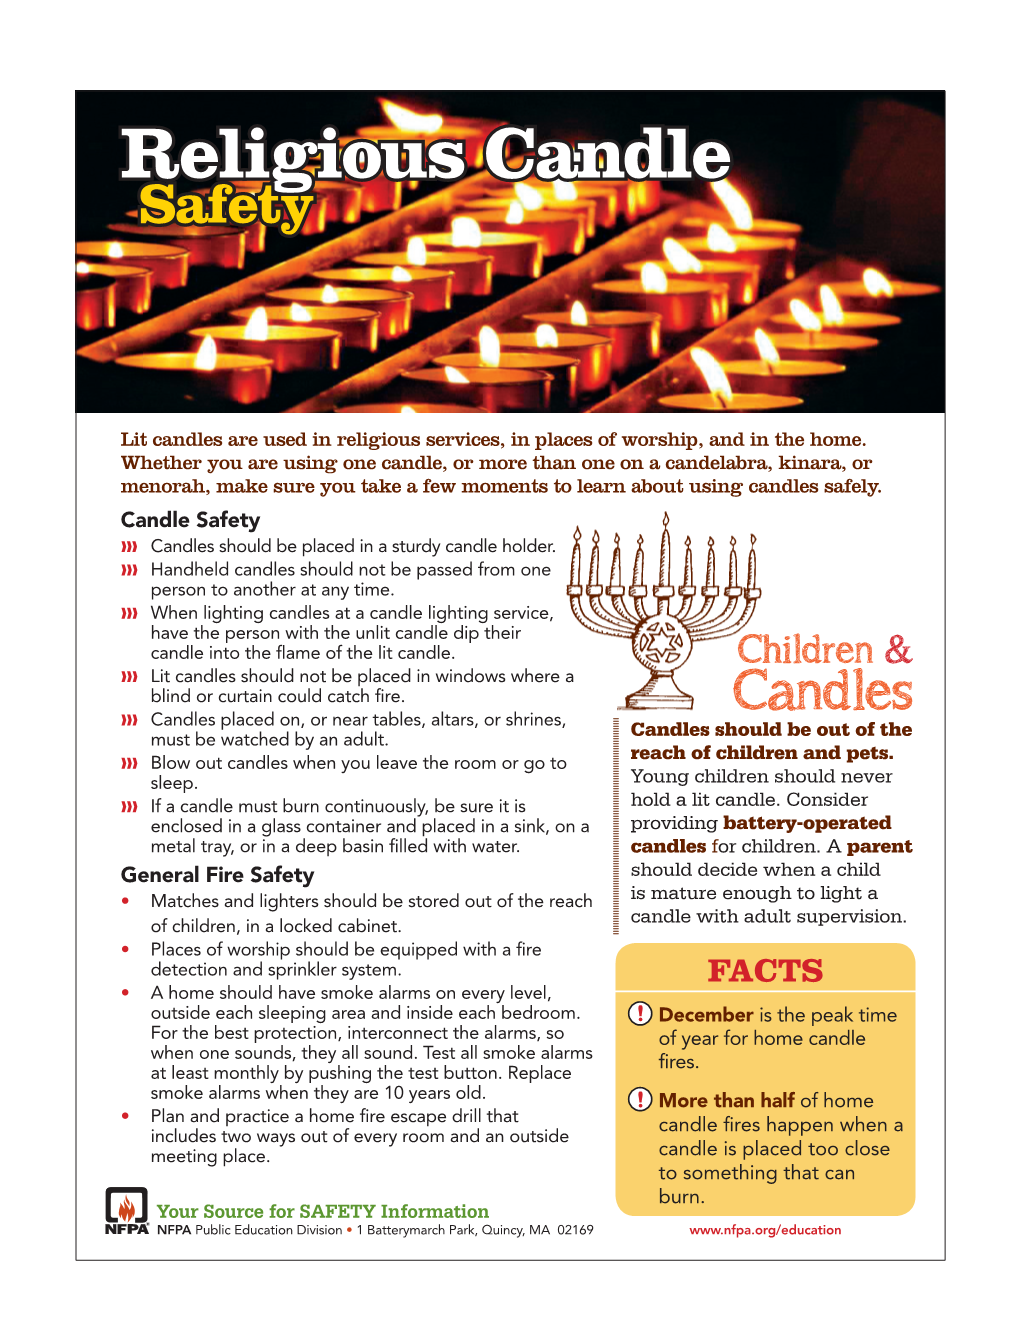 Religious Candle Safety